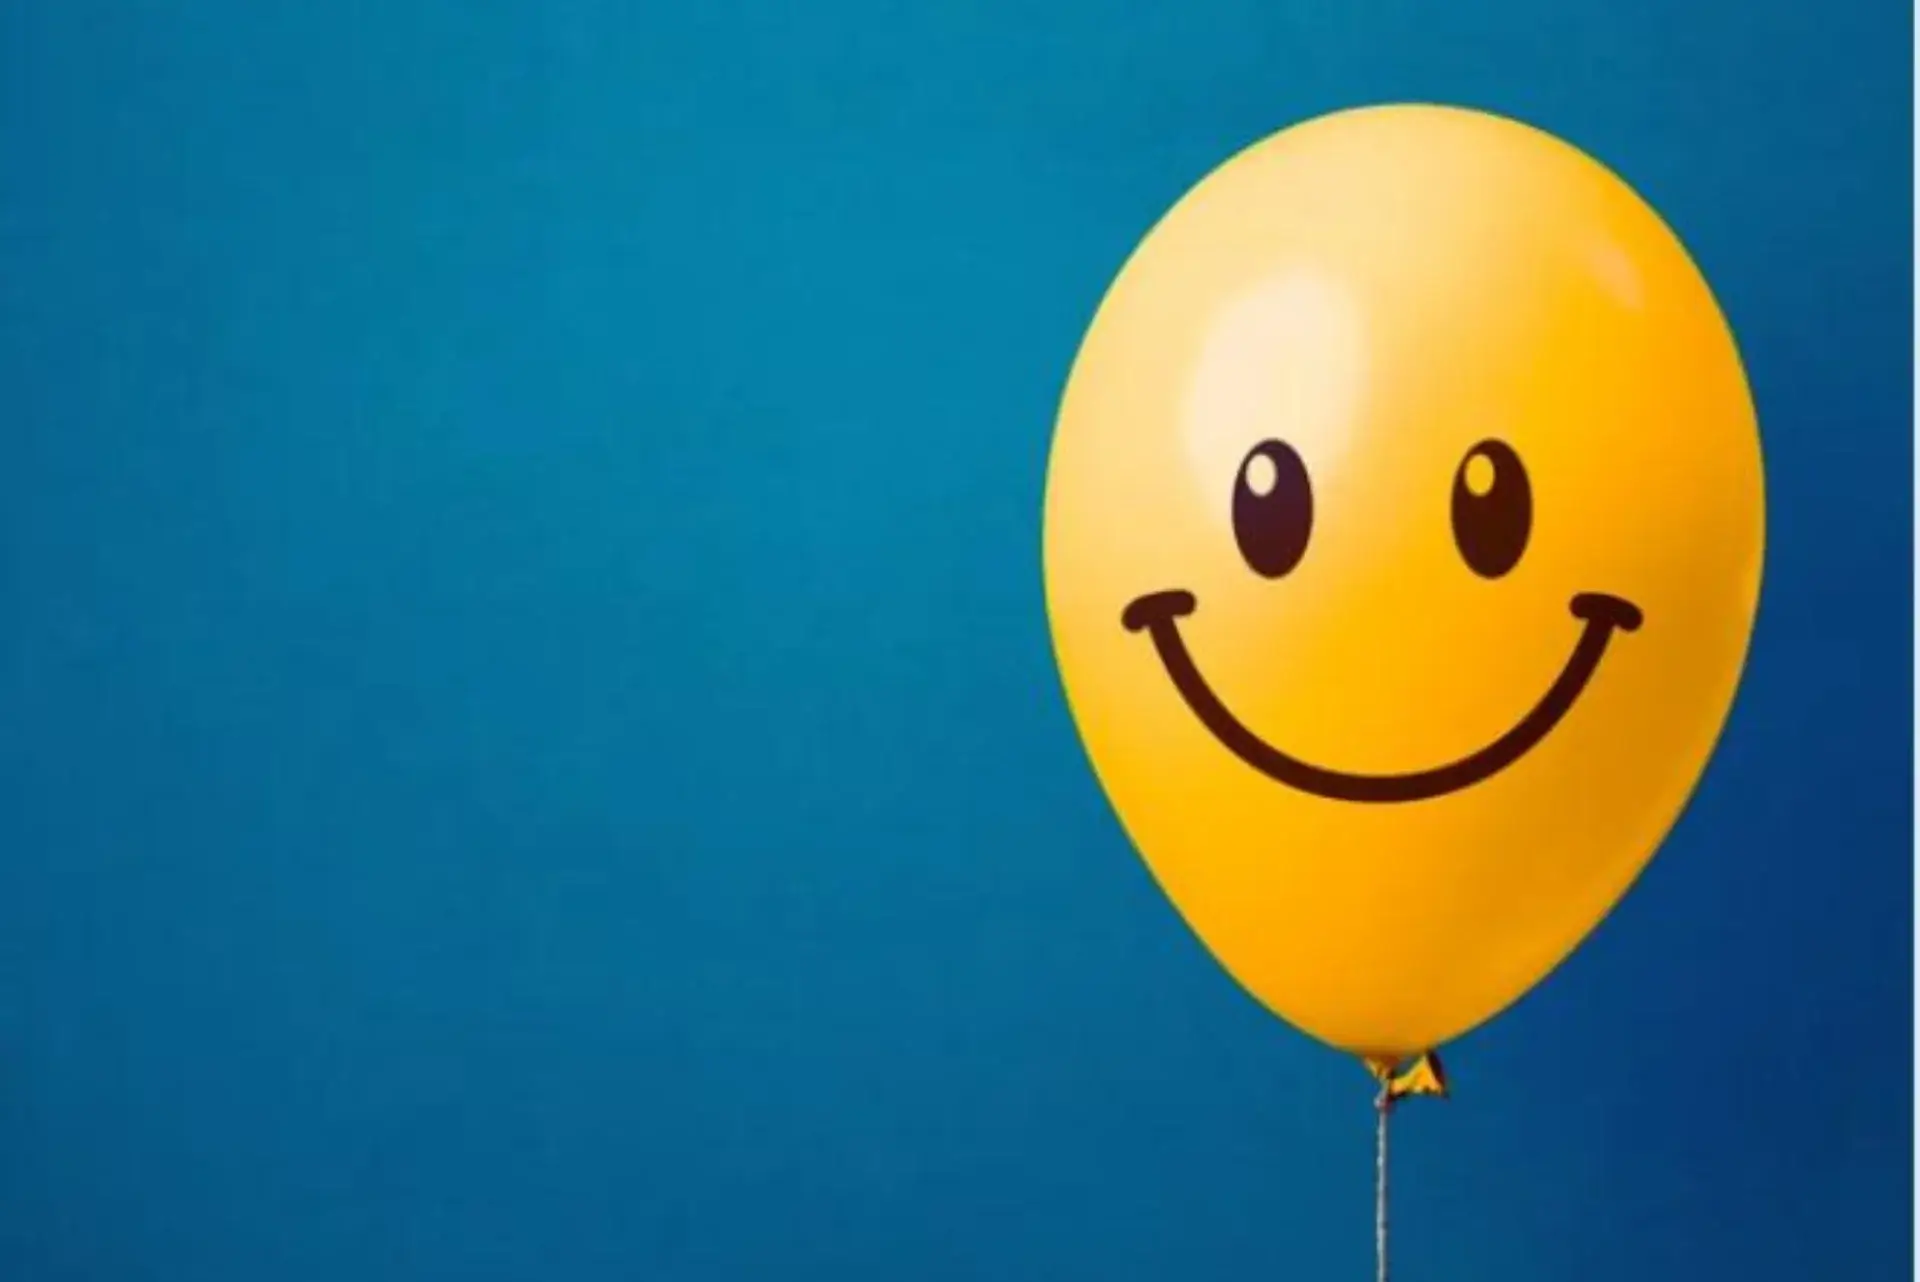 A smiley Balloon with a wide smile